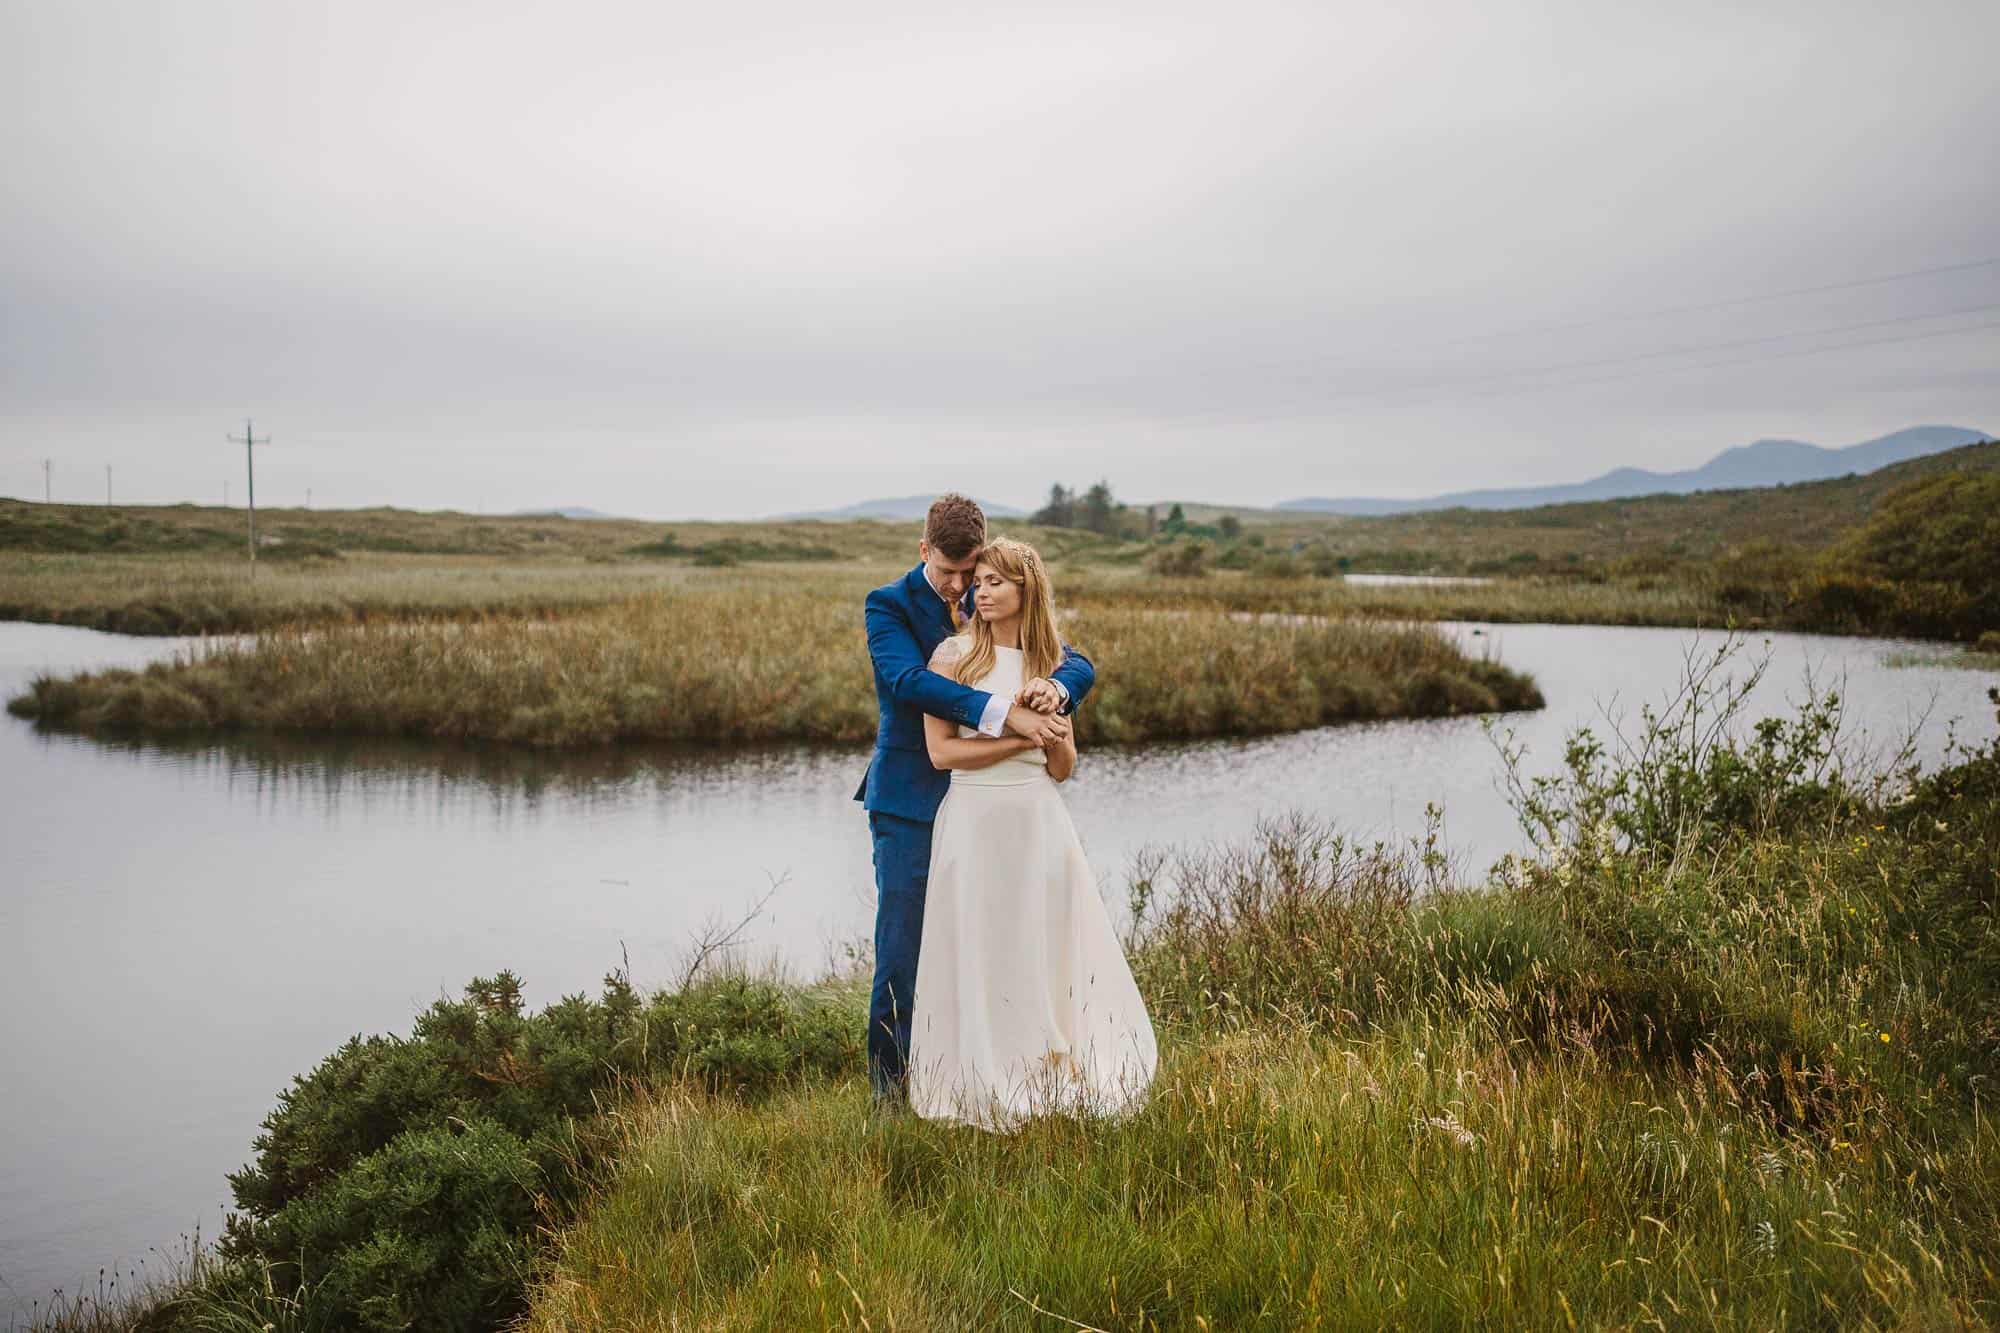 Elopement Ireland Connemara Love in the grasslands, Couple in long grass by the water